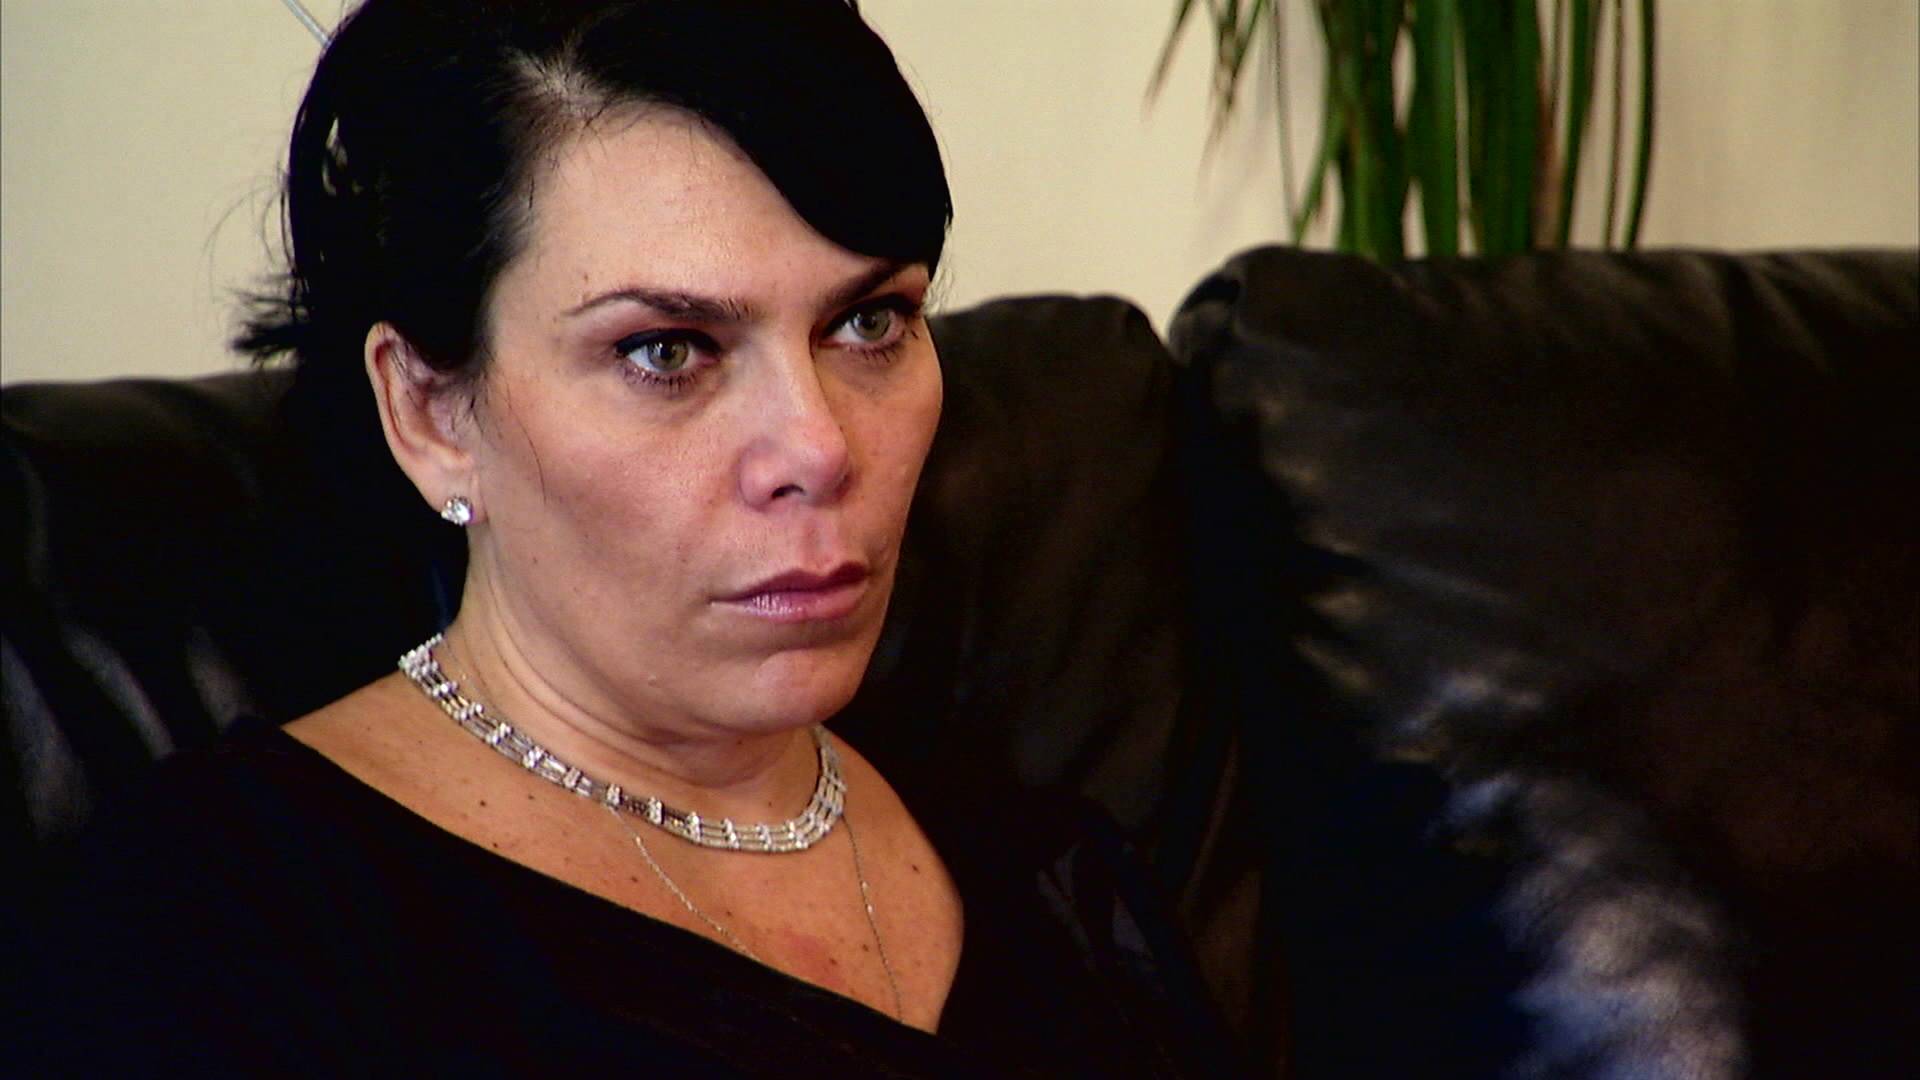 Mob Wives Season 3 Episodes - Watch on Paramount+